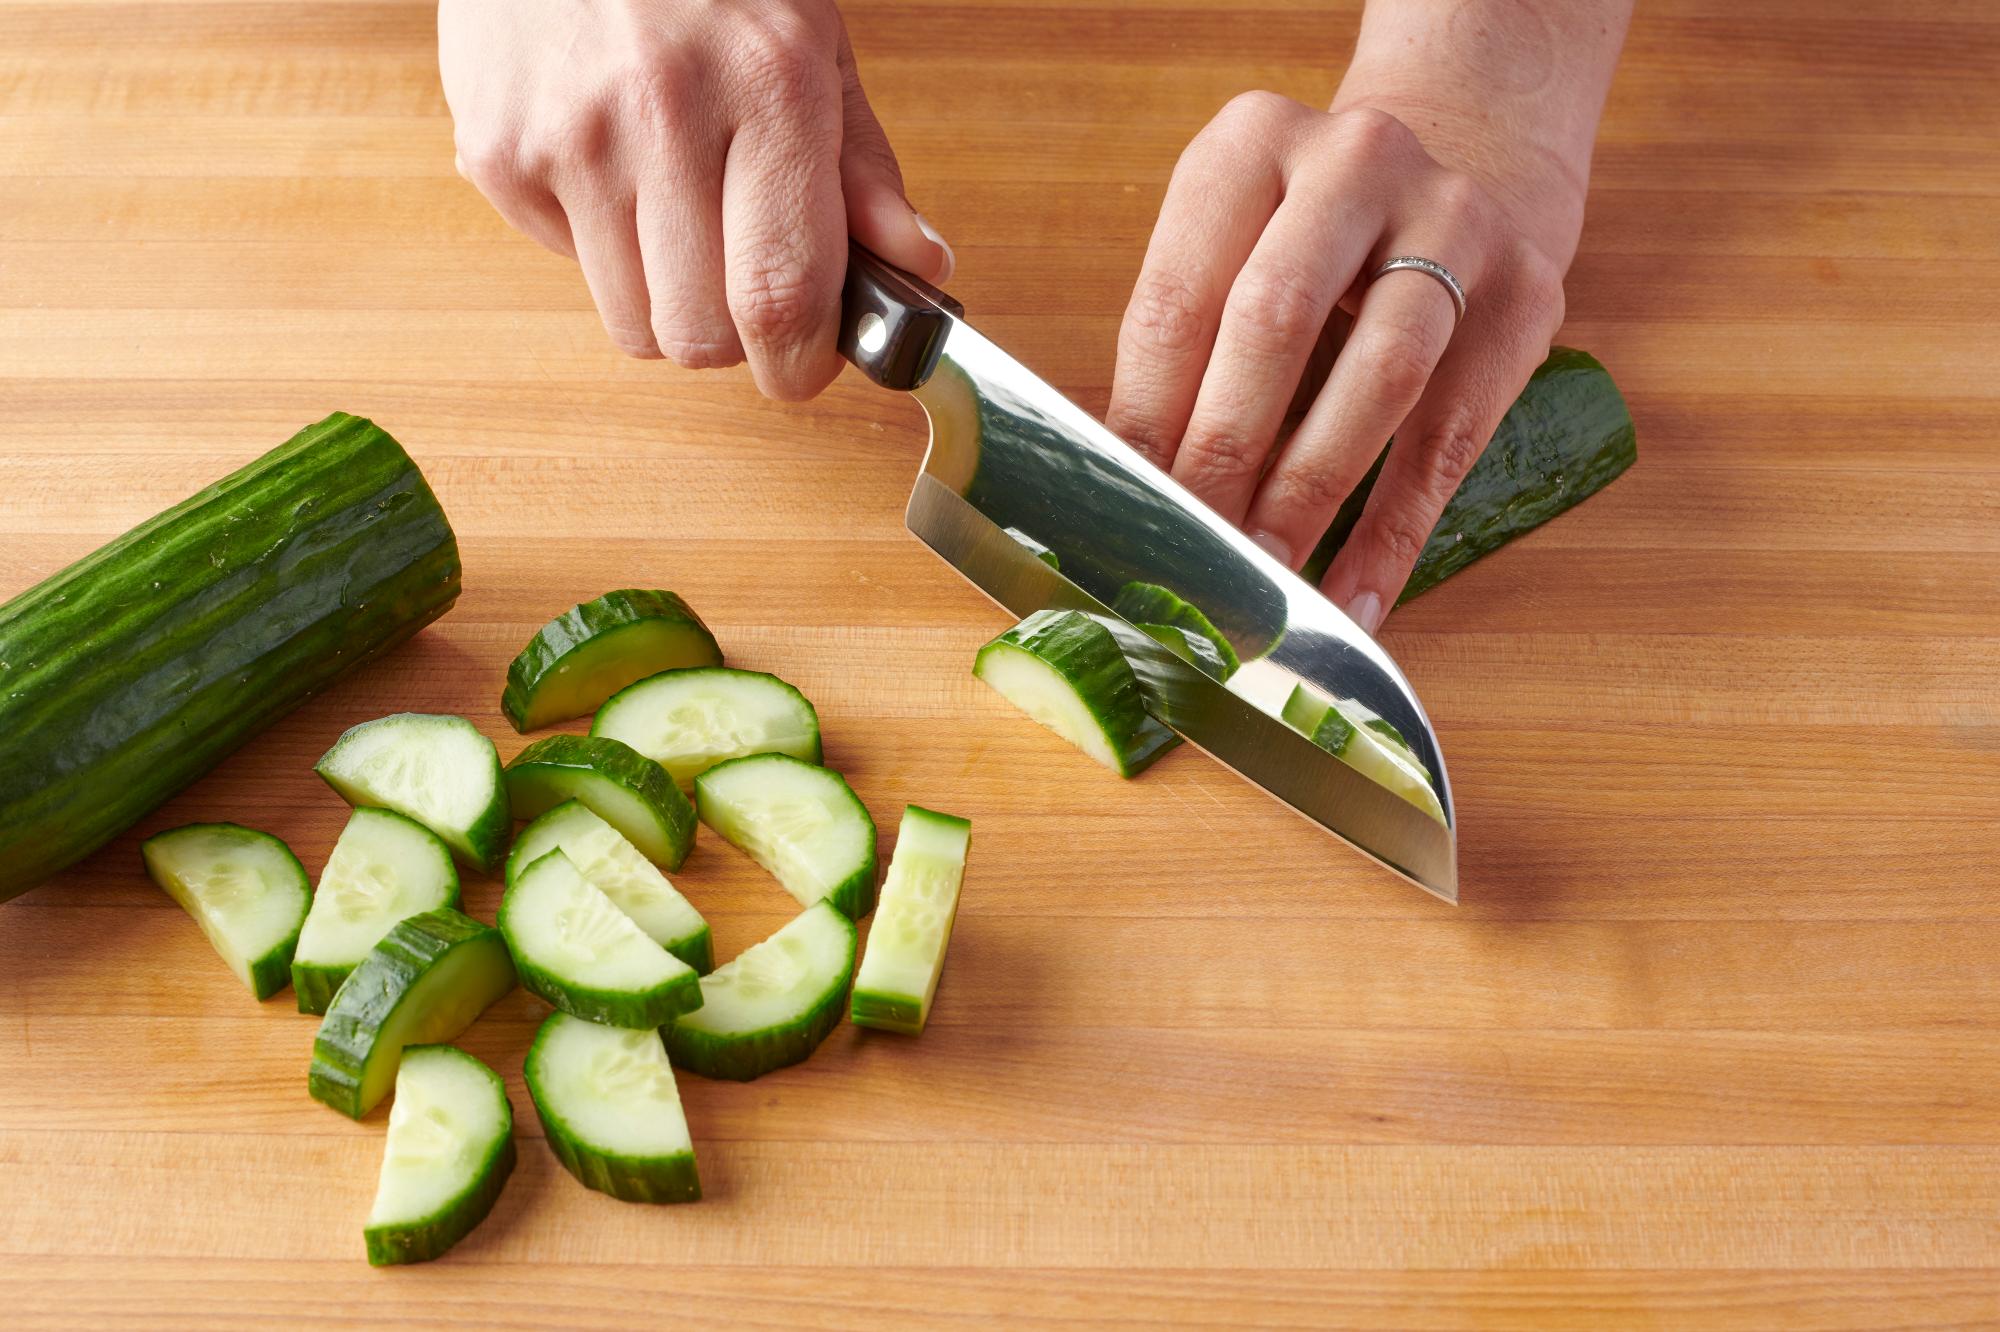 Slicing the cucumber with a Petite Santoku.